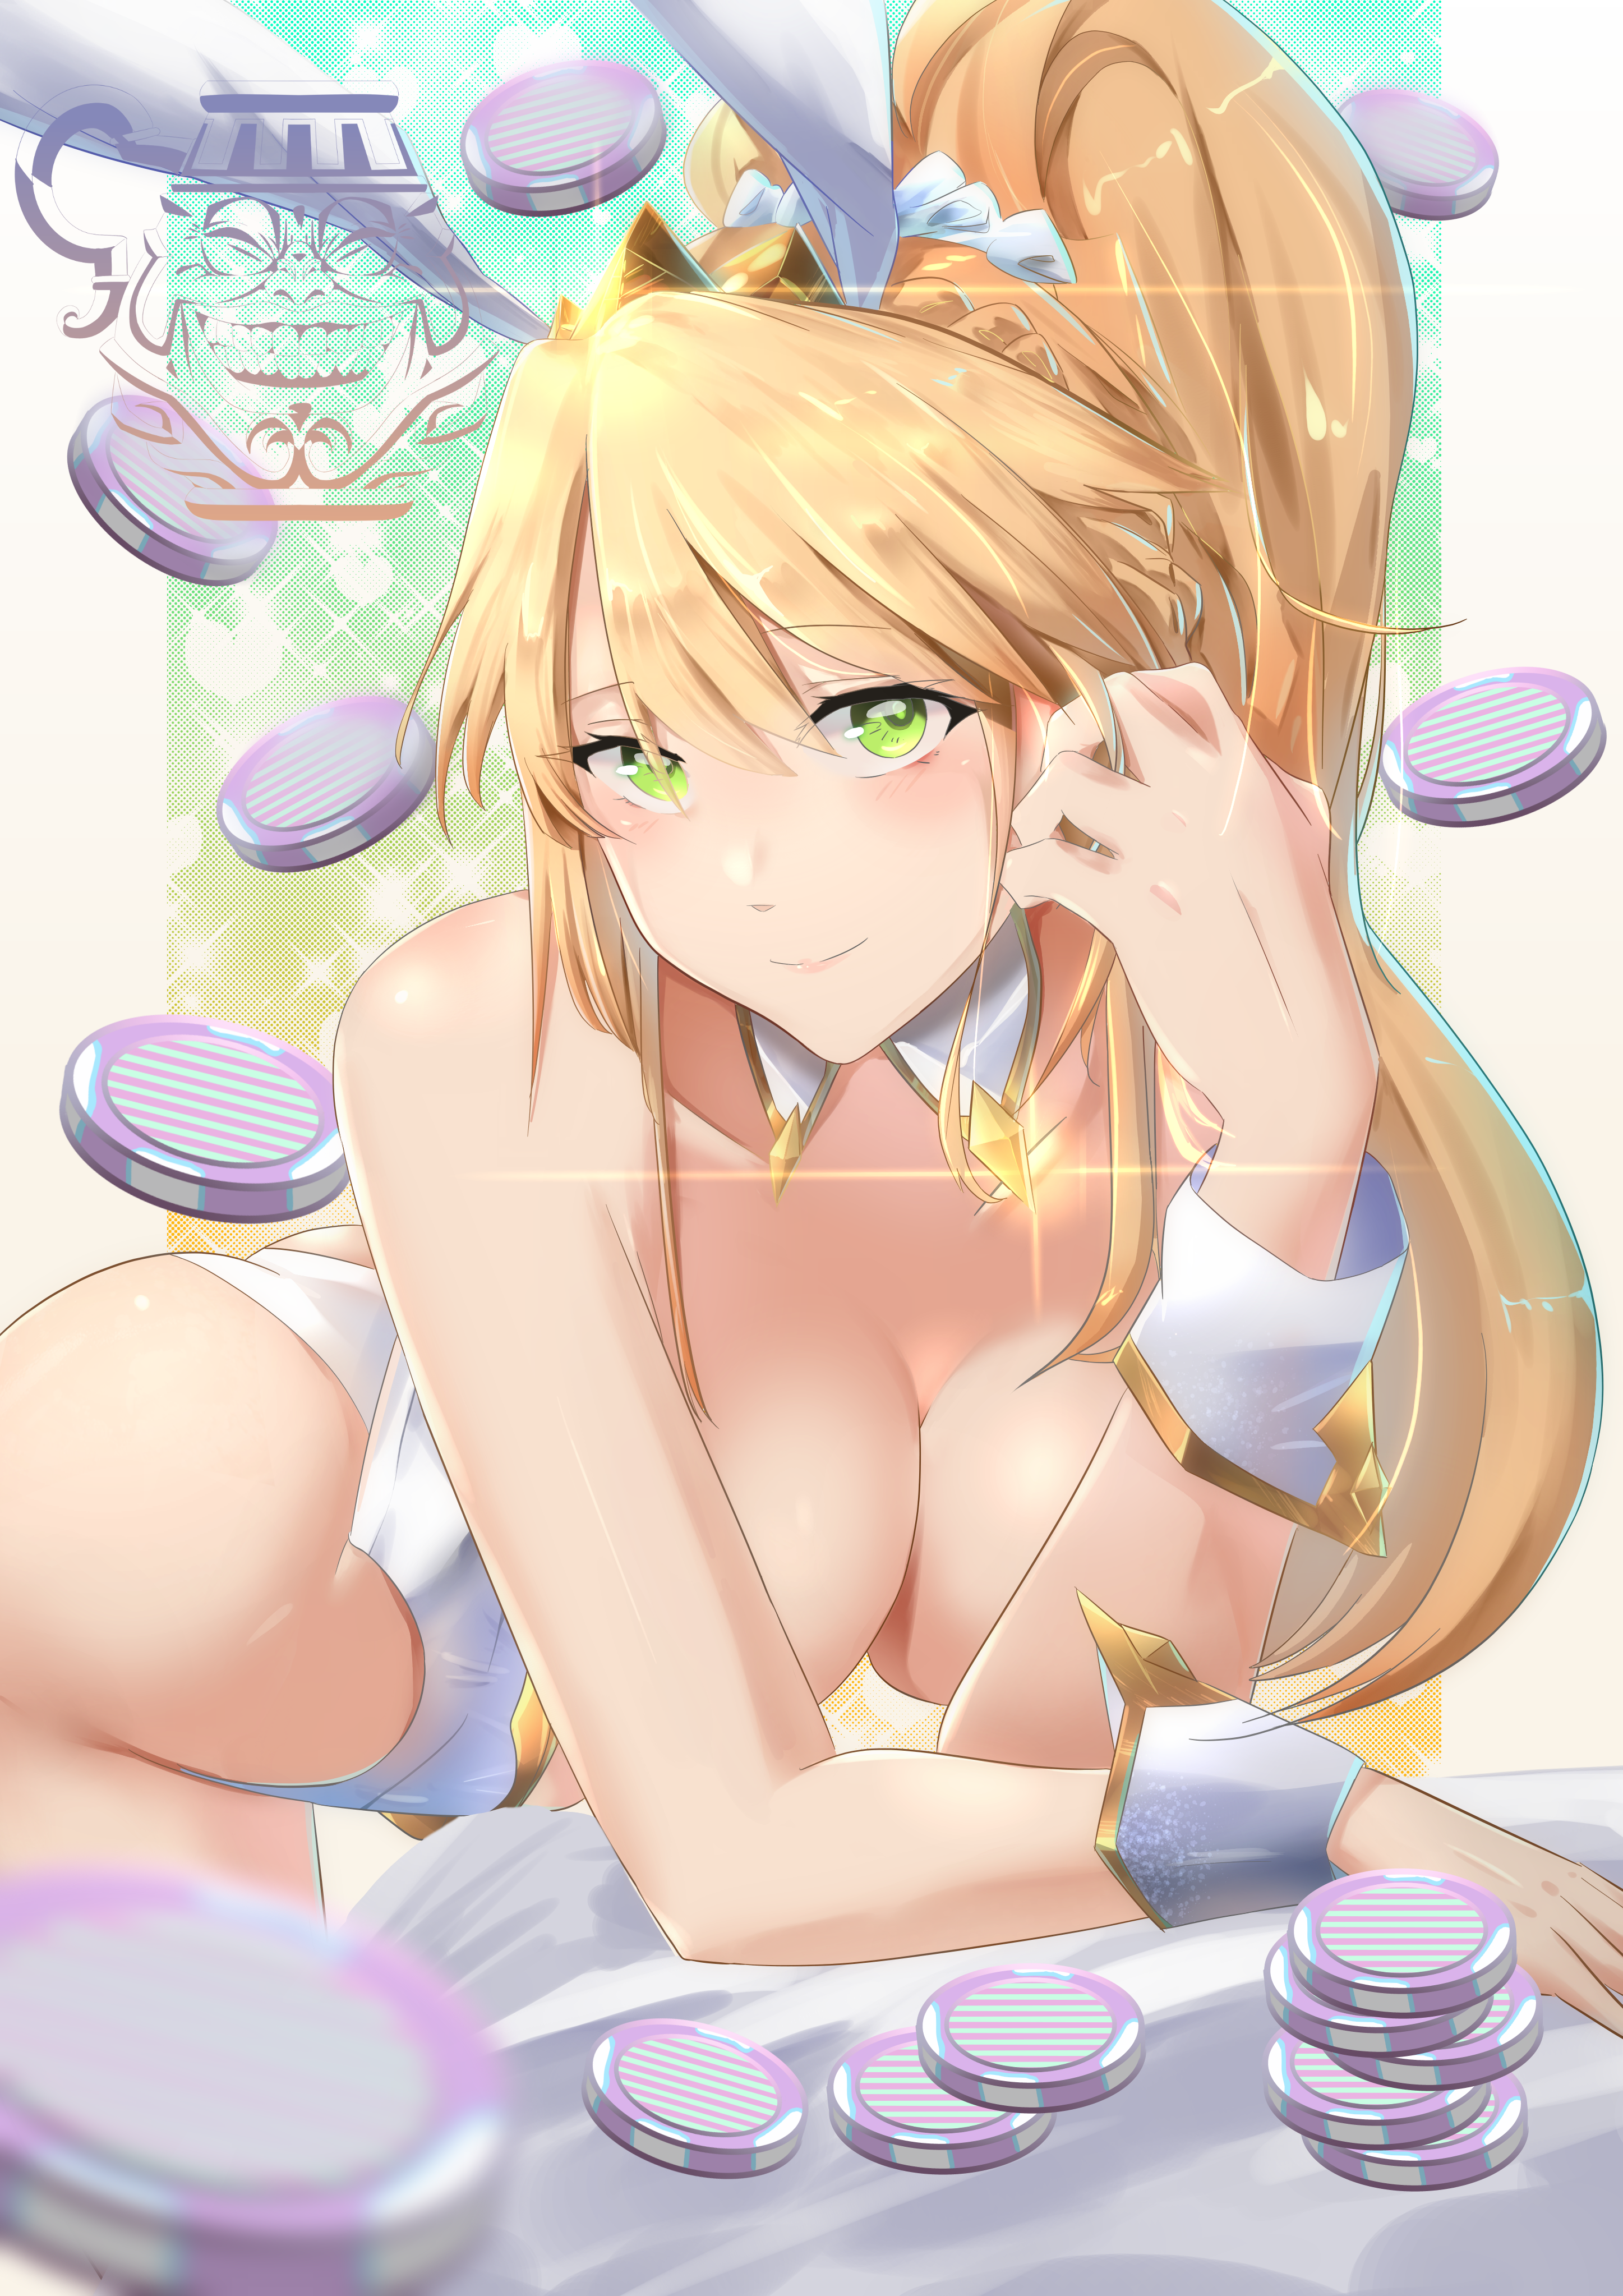 Anime 2894x4093 Fate series Fate/Grand Order Artoria Pendragon (Ruler) bunny suit bunny ears blonde green eyes poker chips ponytail cleavage big boobs Yu-Gi-Oh! anime girls